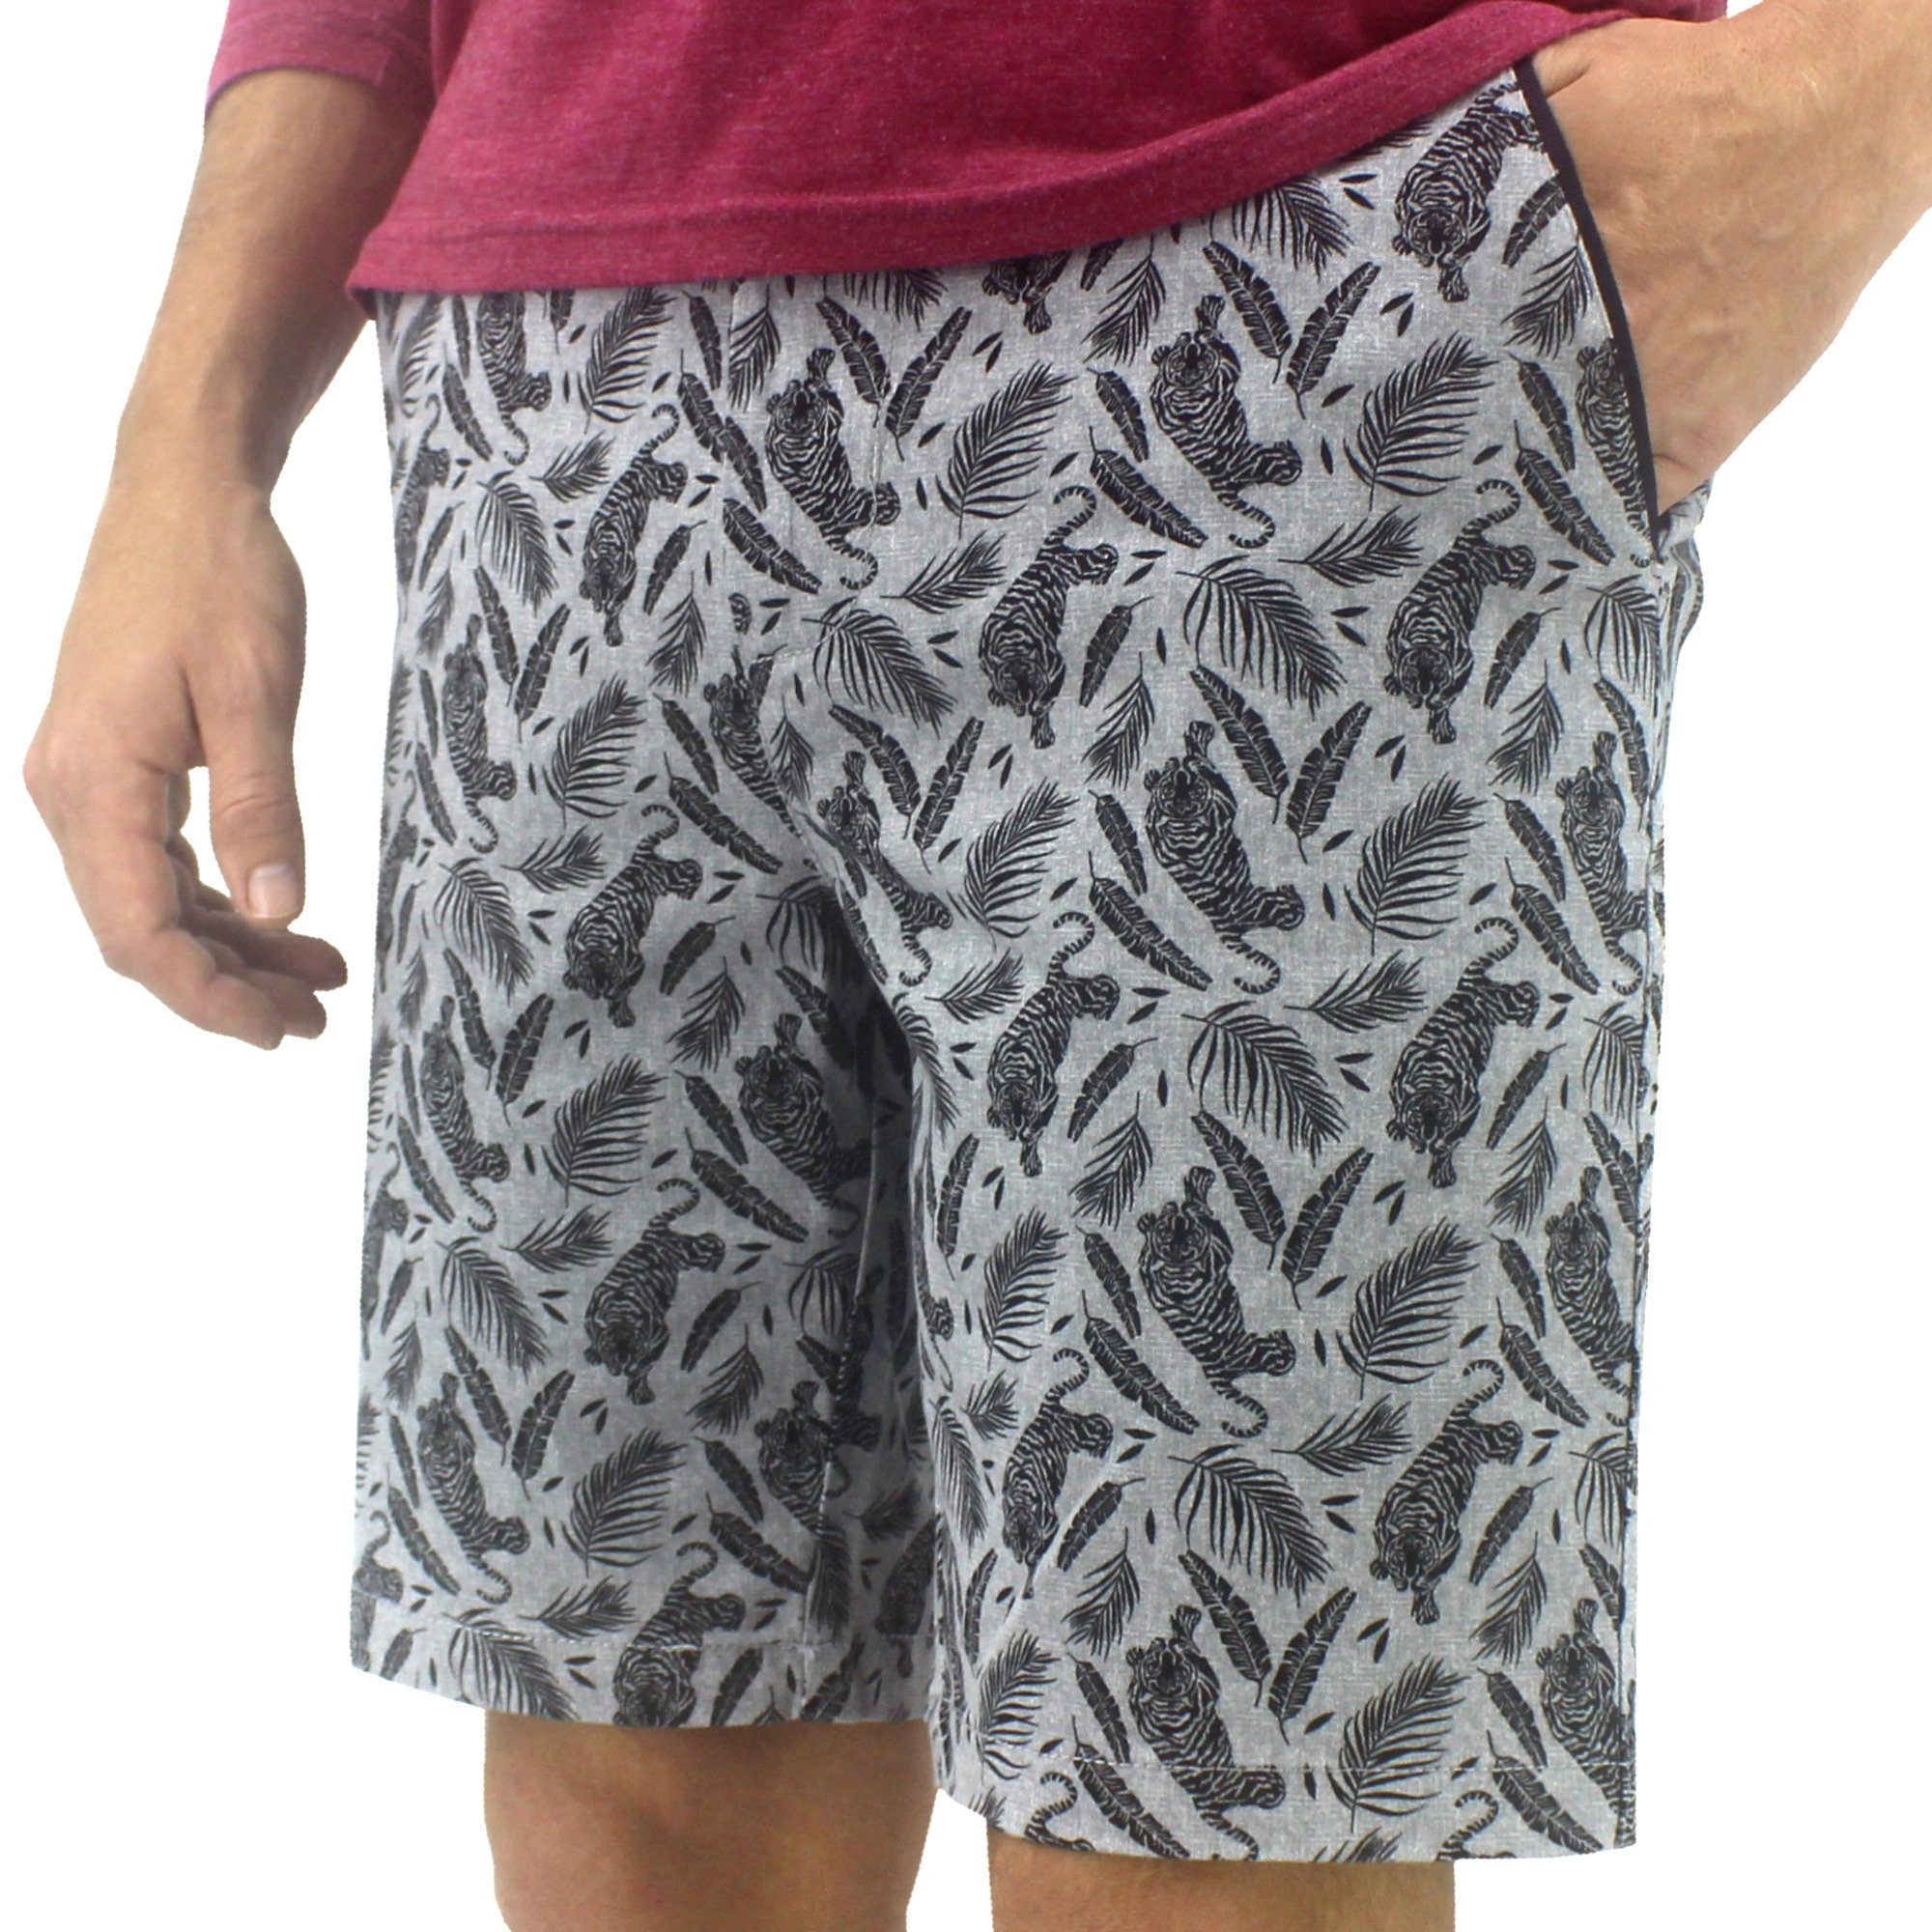 Light Grey Bermuda Shorts. Chino Shorts for Men with Tiger All Over Print